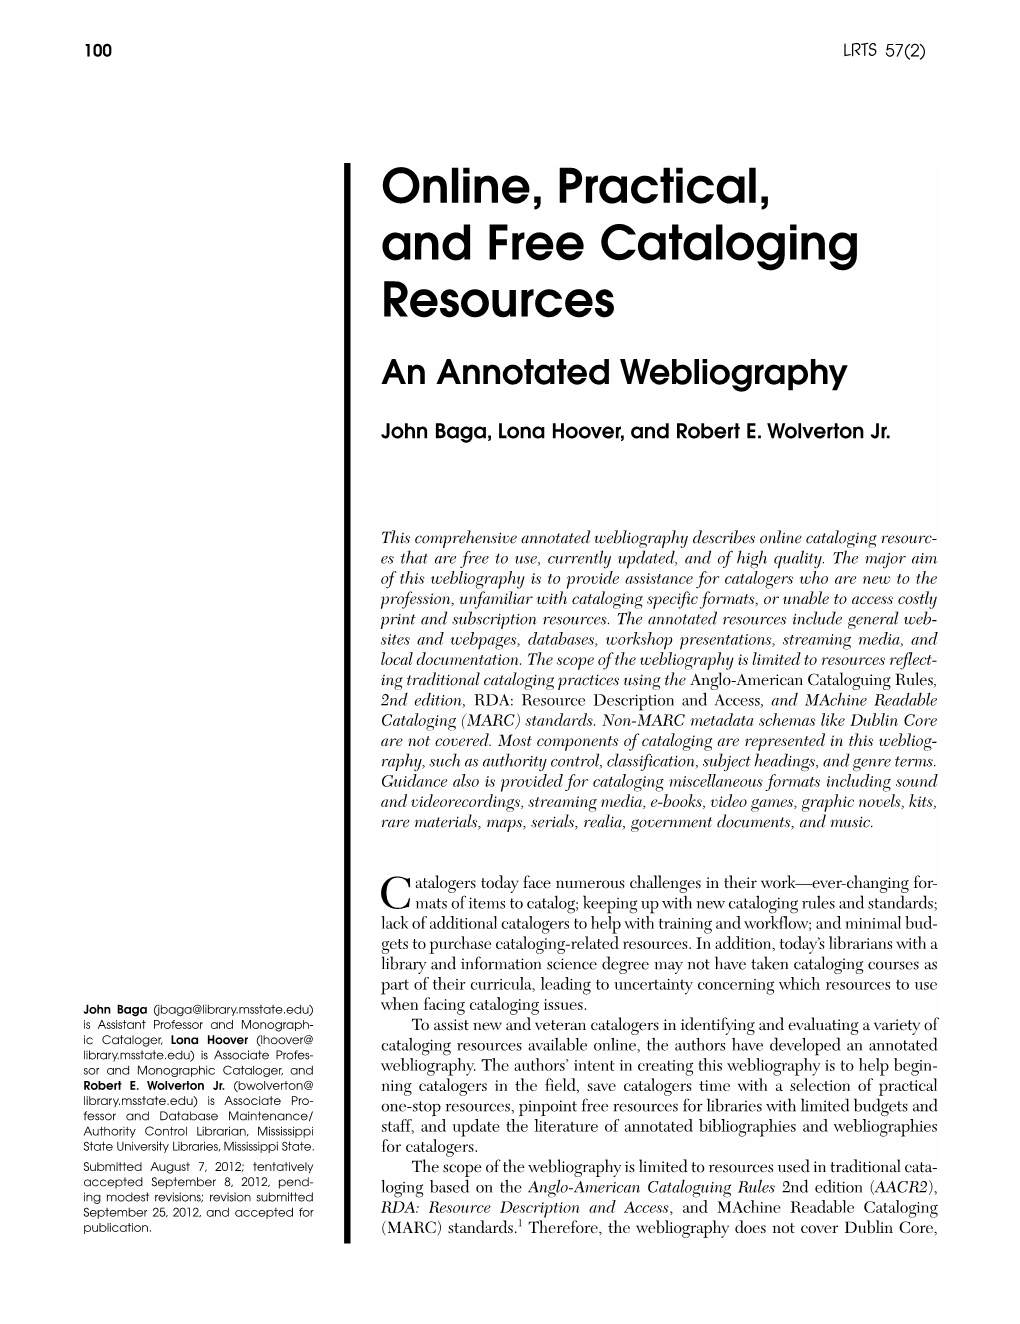 Online, Practical, and Free Cataloging Resources an Annotated Webliography